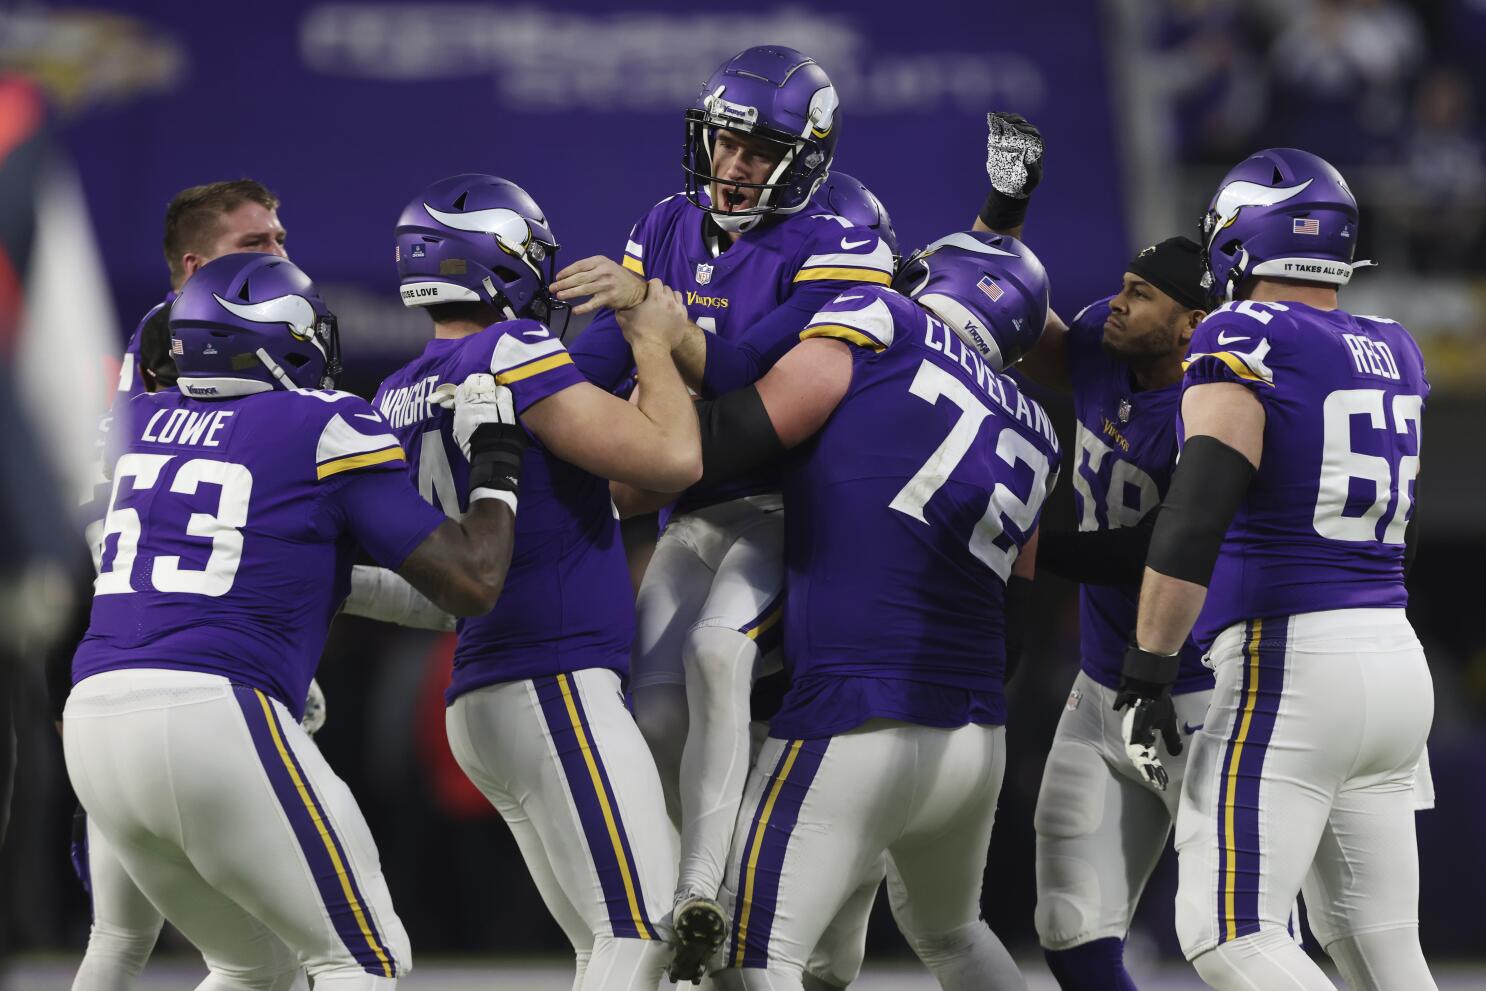 NFL-Vikings Complete Biggest Comeback in NFL History, Beat Colts